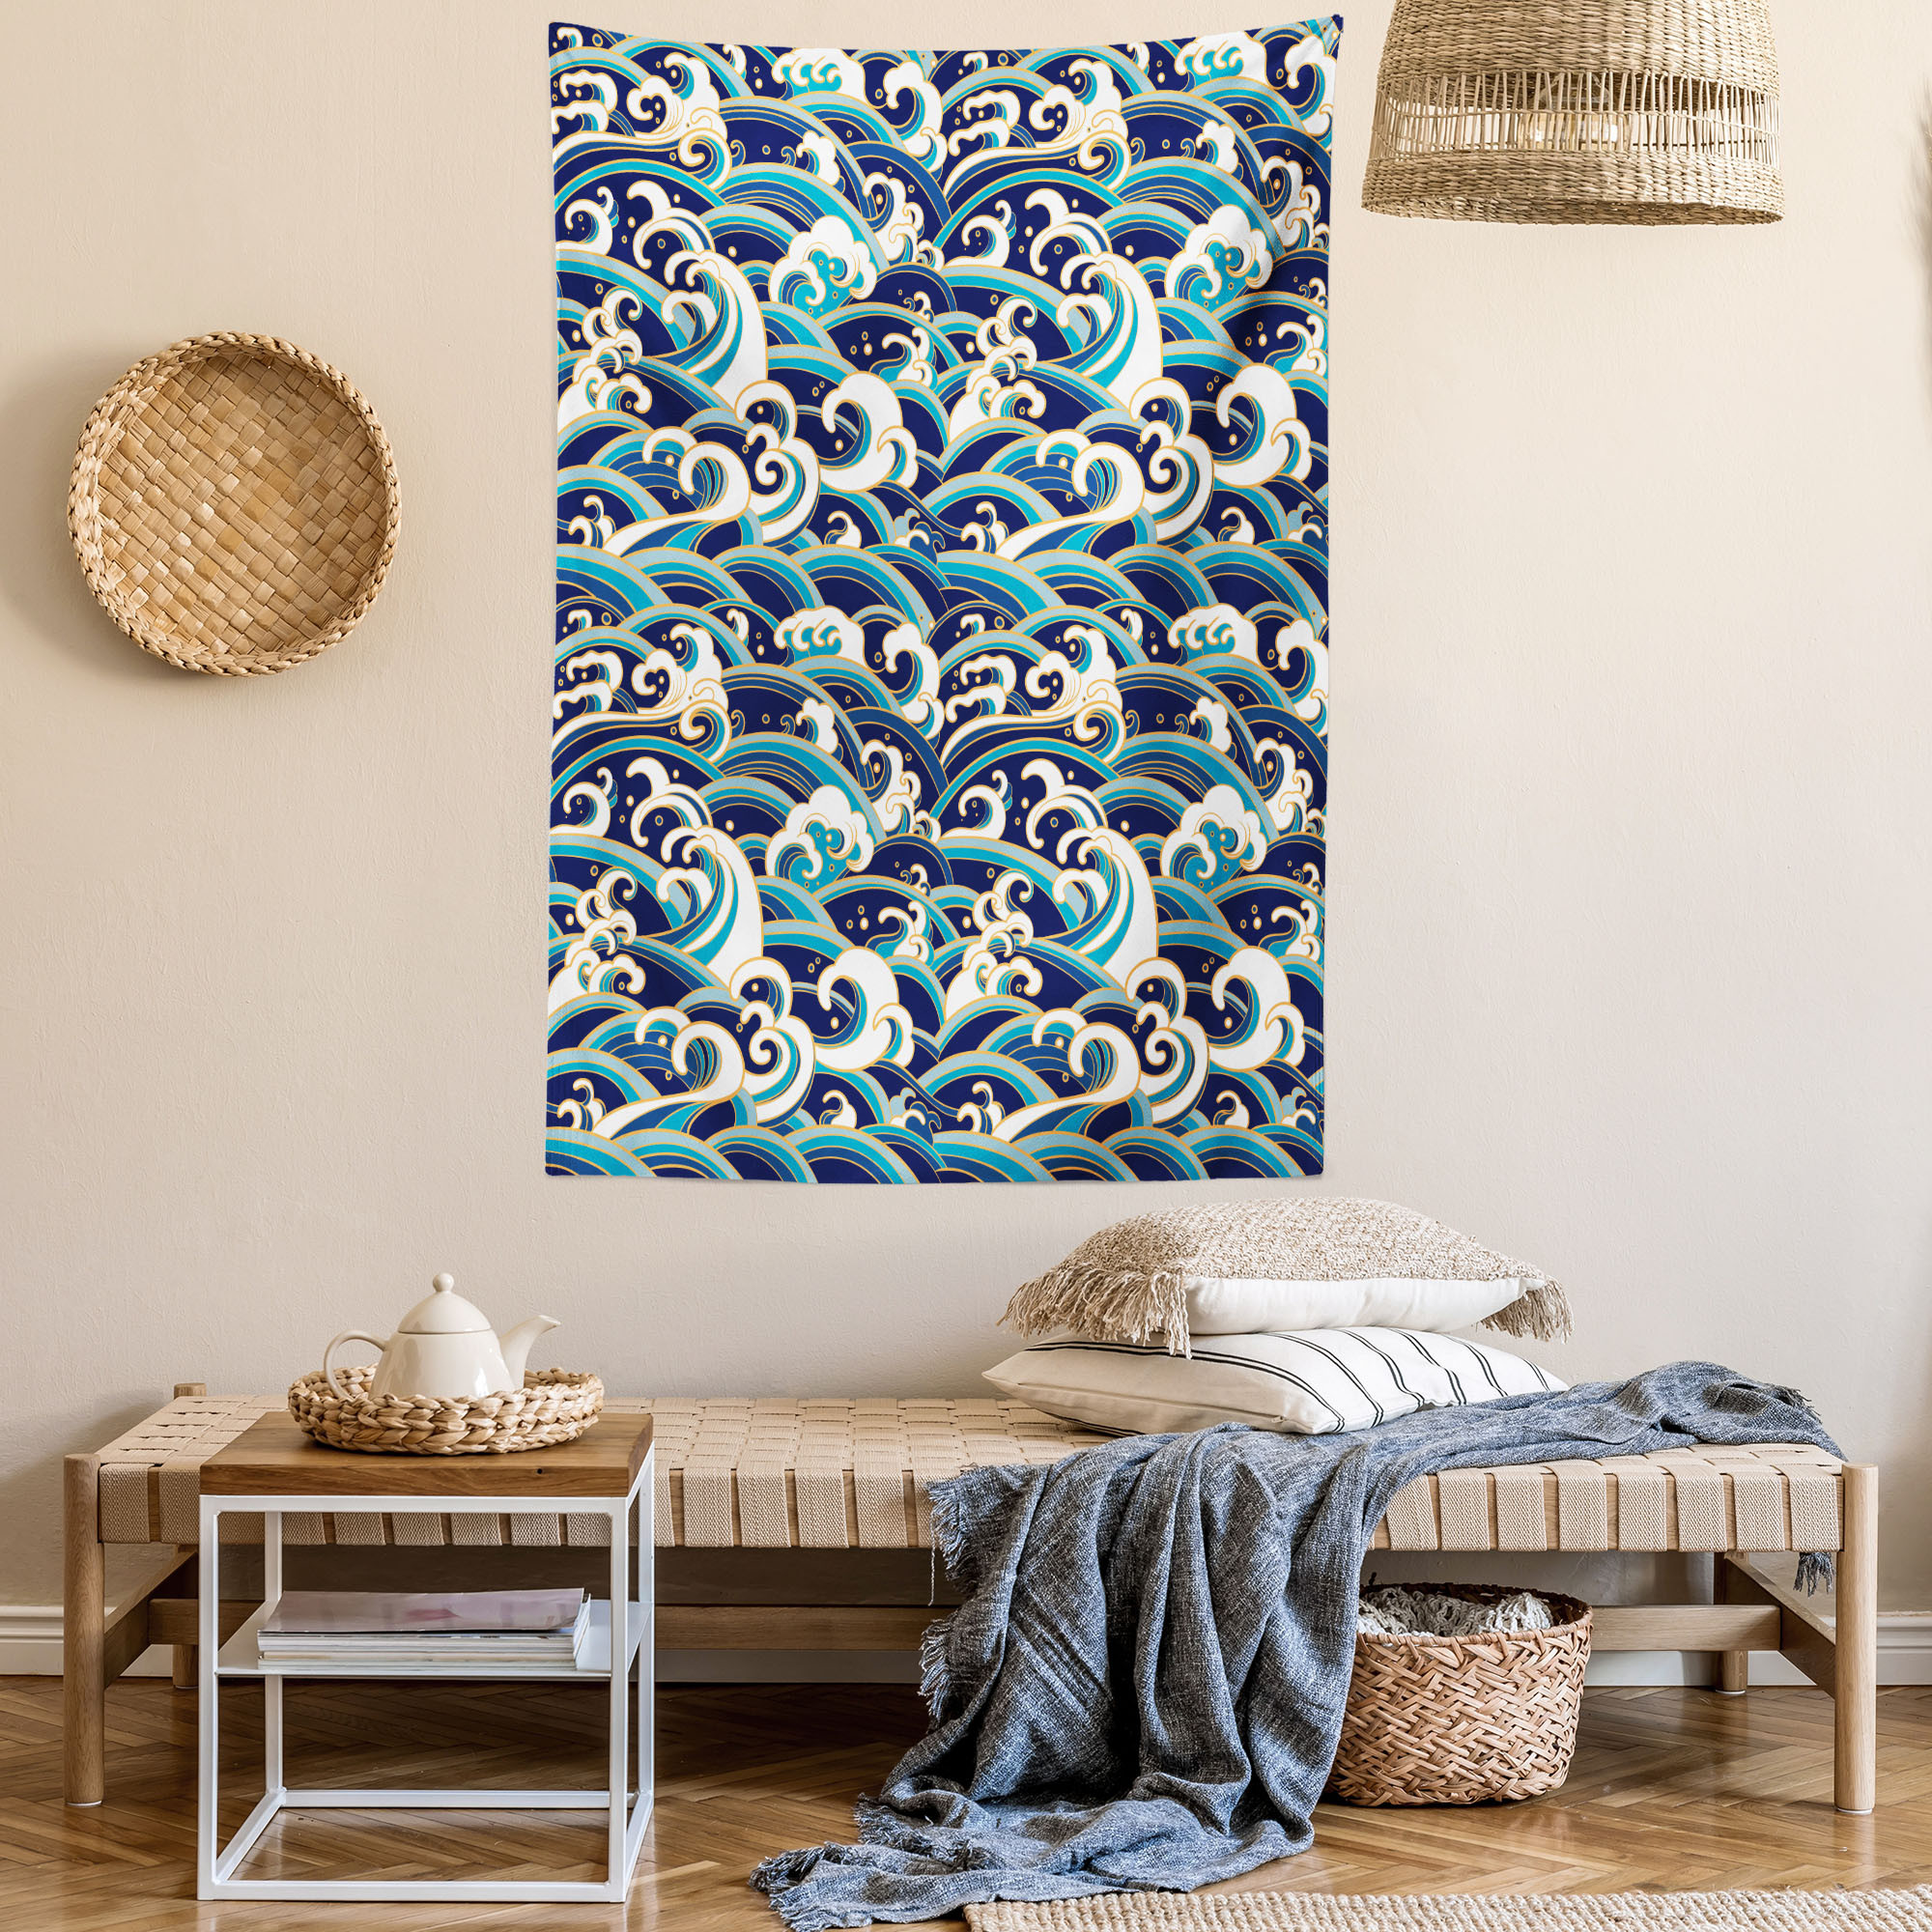 Nautical Tapestry, Traditional Oriental Style Ocean Waves Pattern with Foam and Splashes Print, Wall Hanging for Bedroom Living Room Dorm Decor, 40W X 60L Inches, Blue and White, by Ambesonne - image 2 of 5